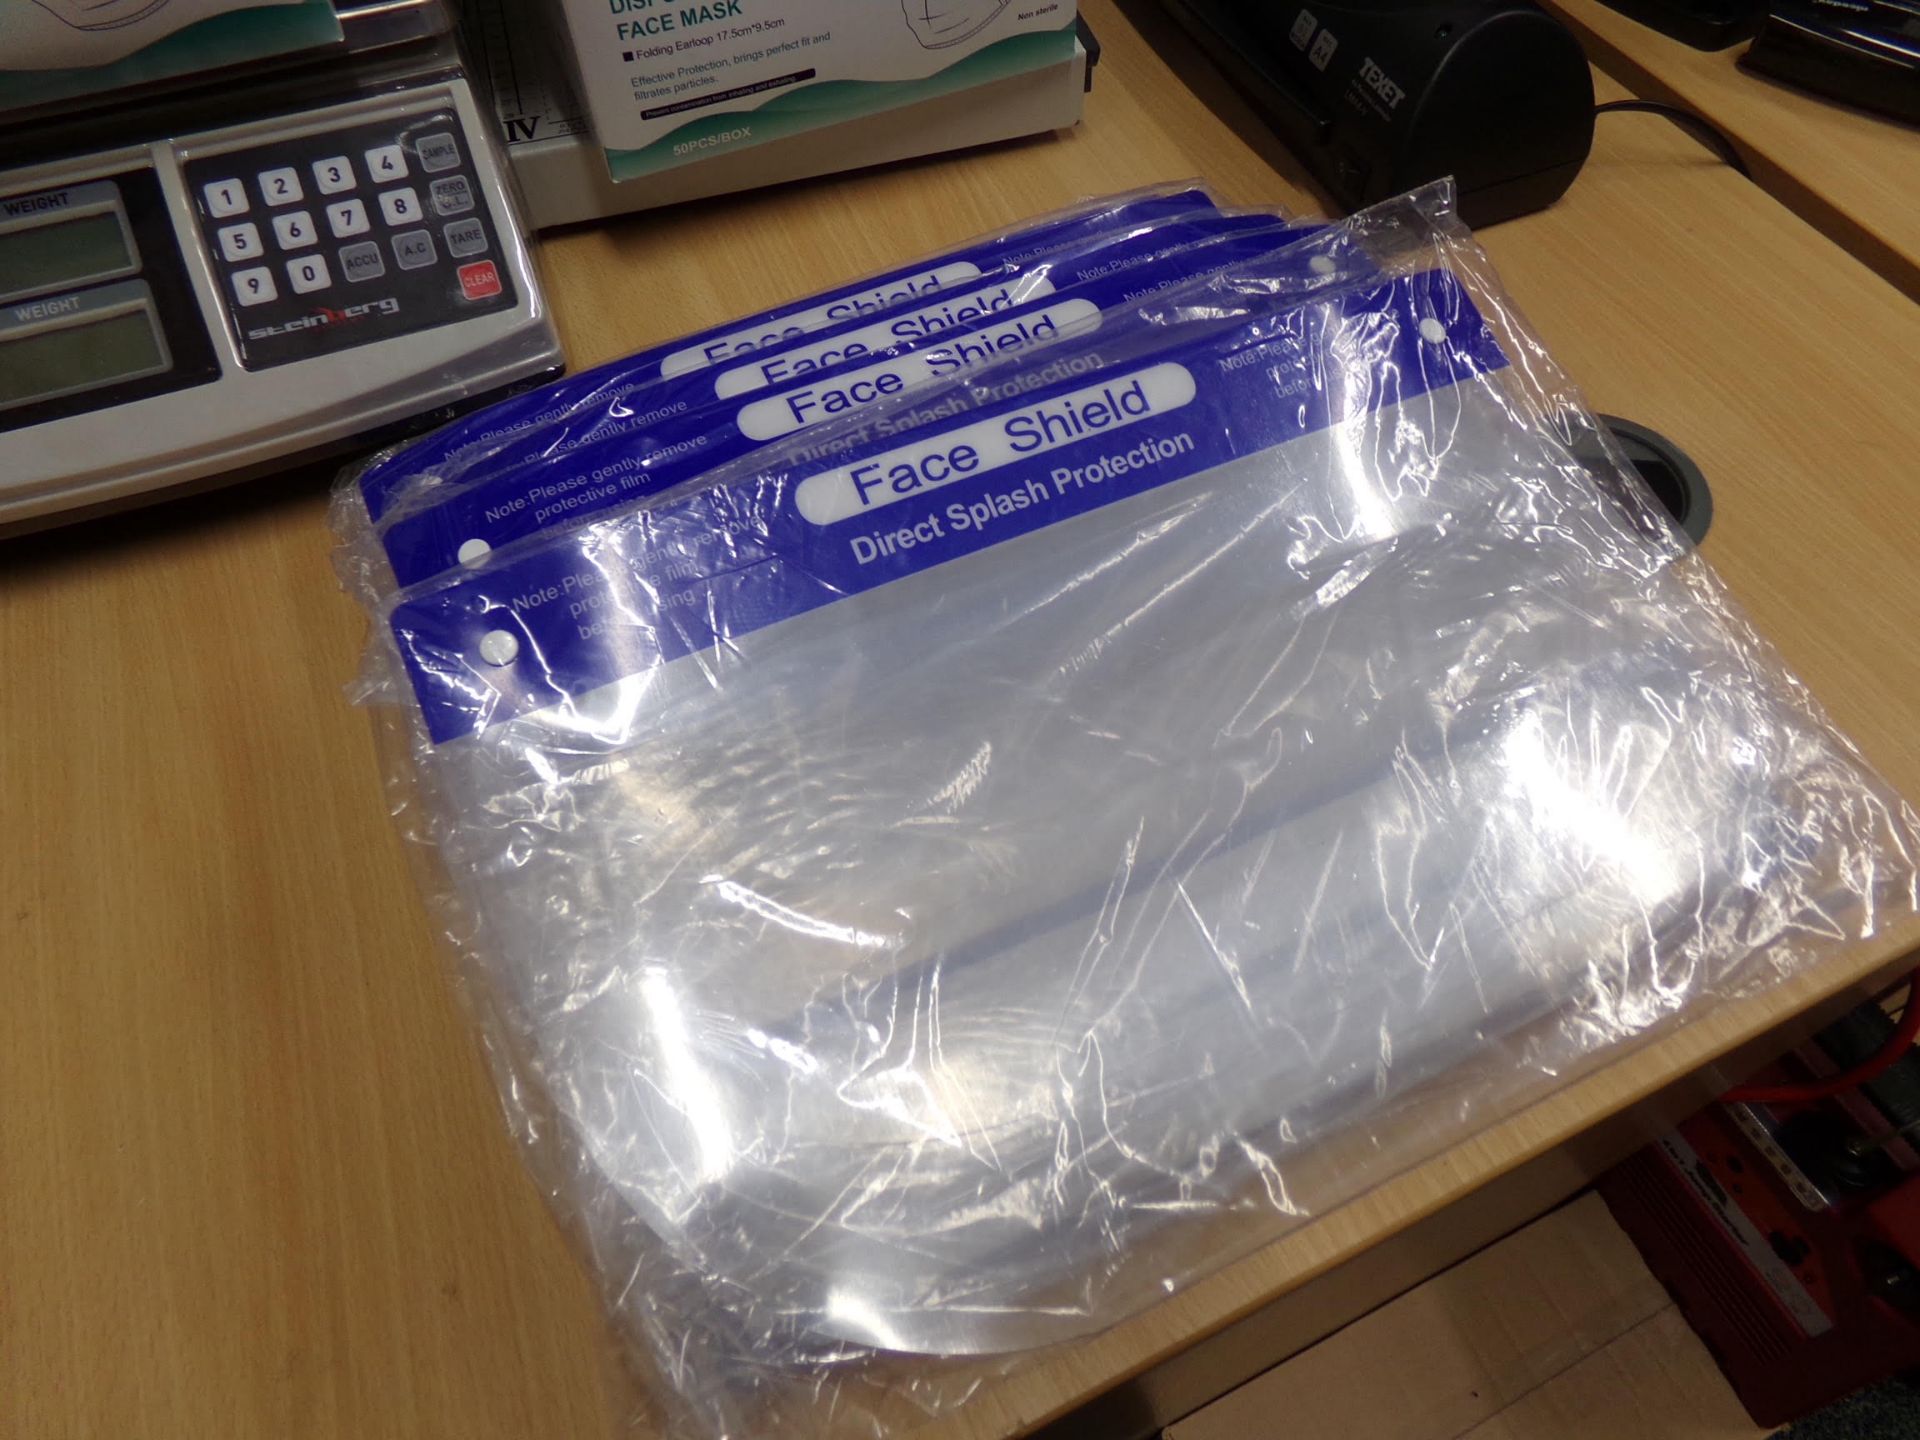 30 X BRAND NEW CLEAR PLASTIC FACE SHIELDS